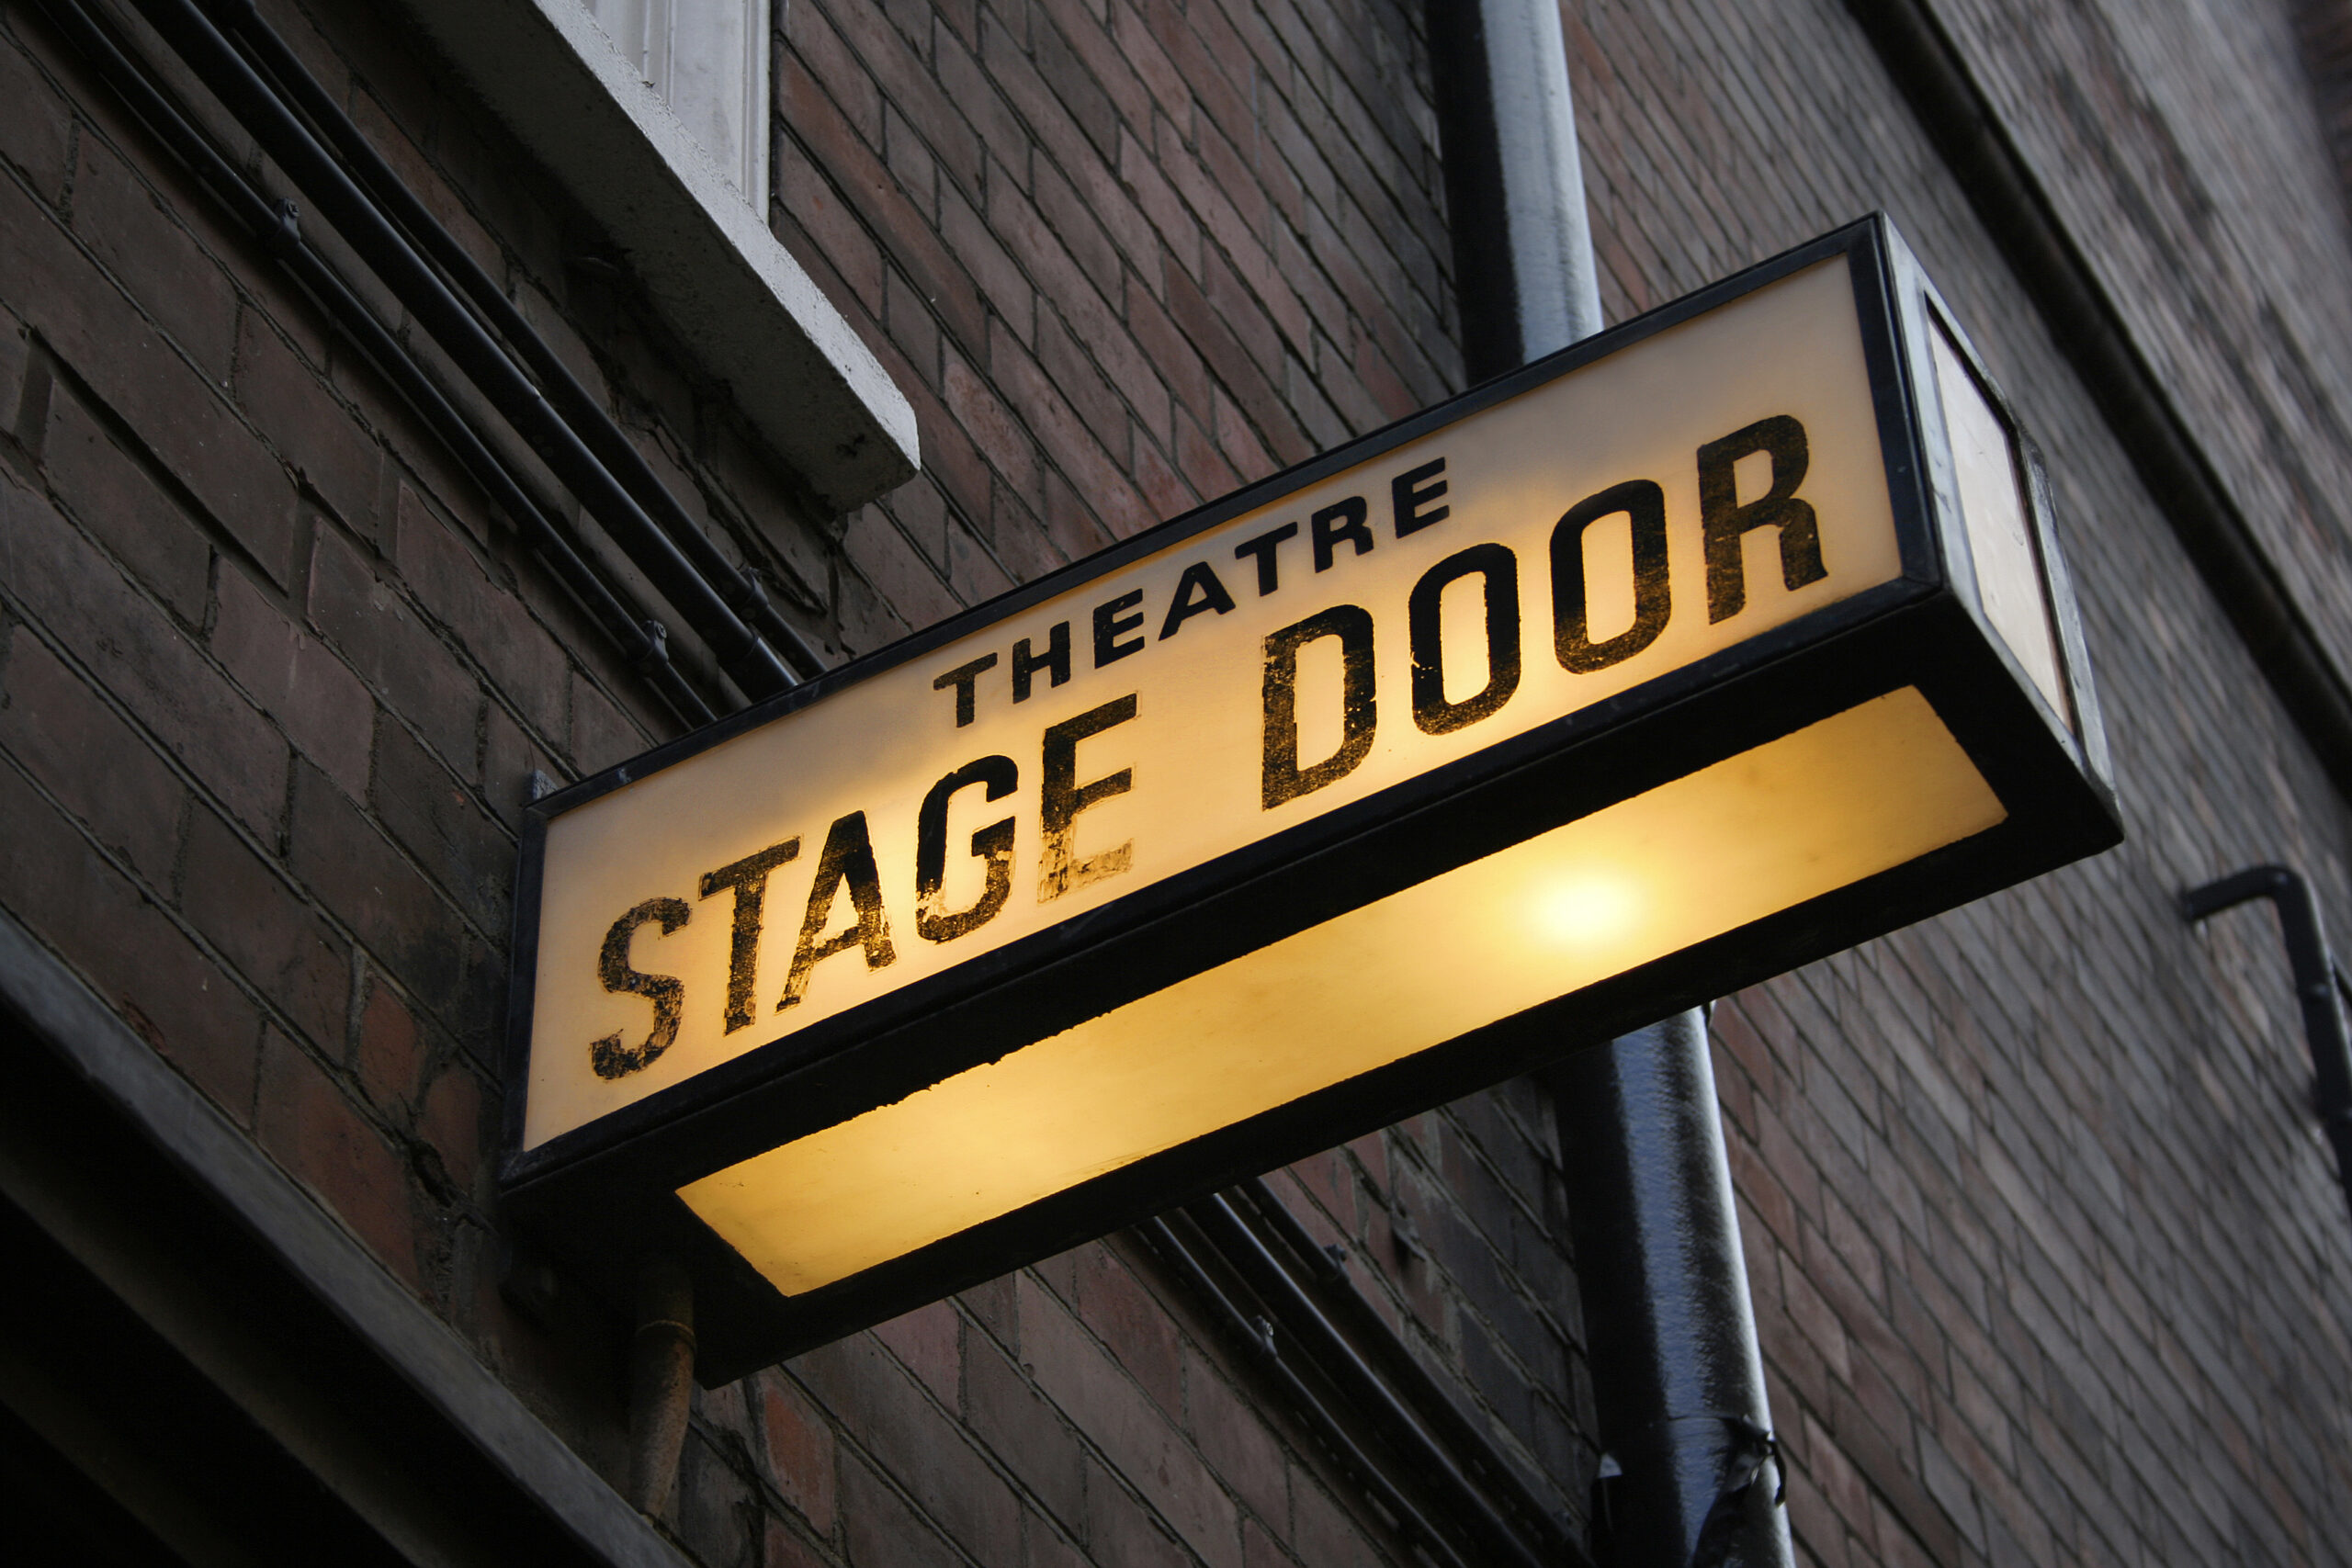 Close up photo of a back lit sign that reads "Theatre Stage Door"